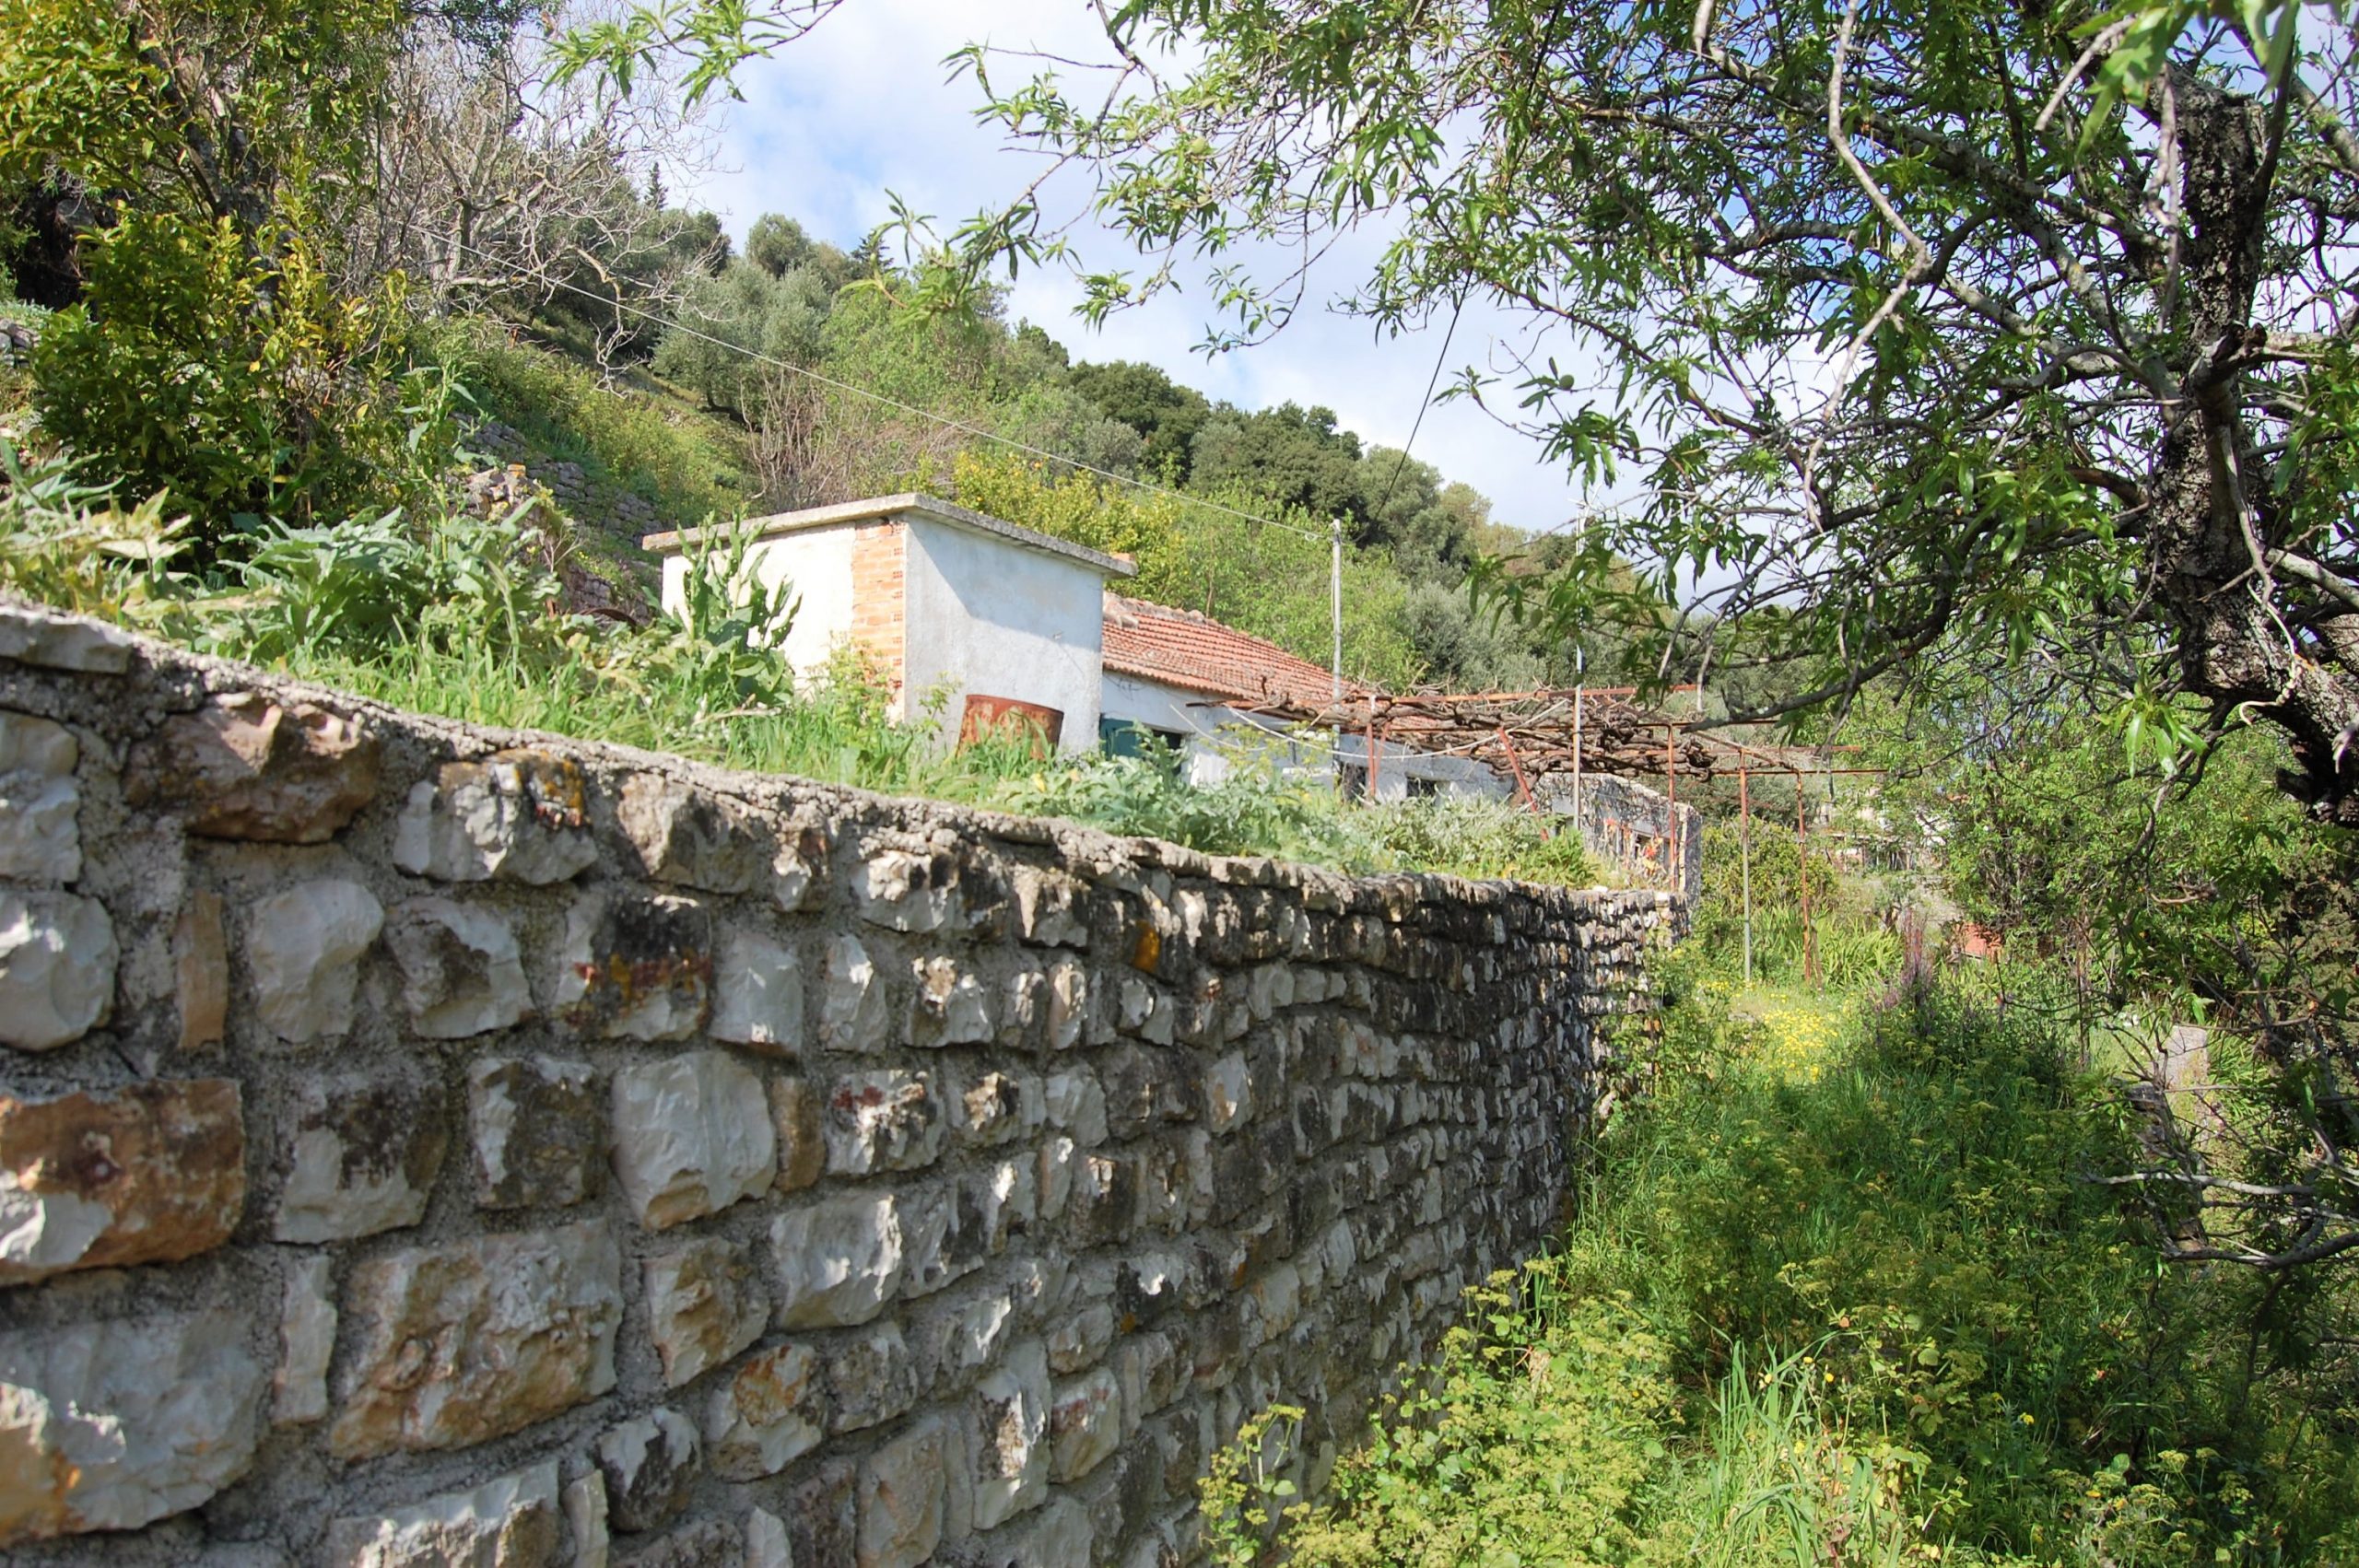 Footpath leading to house for sale in ithaca Greece, Rachi